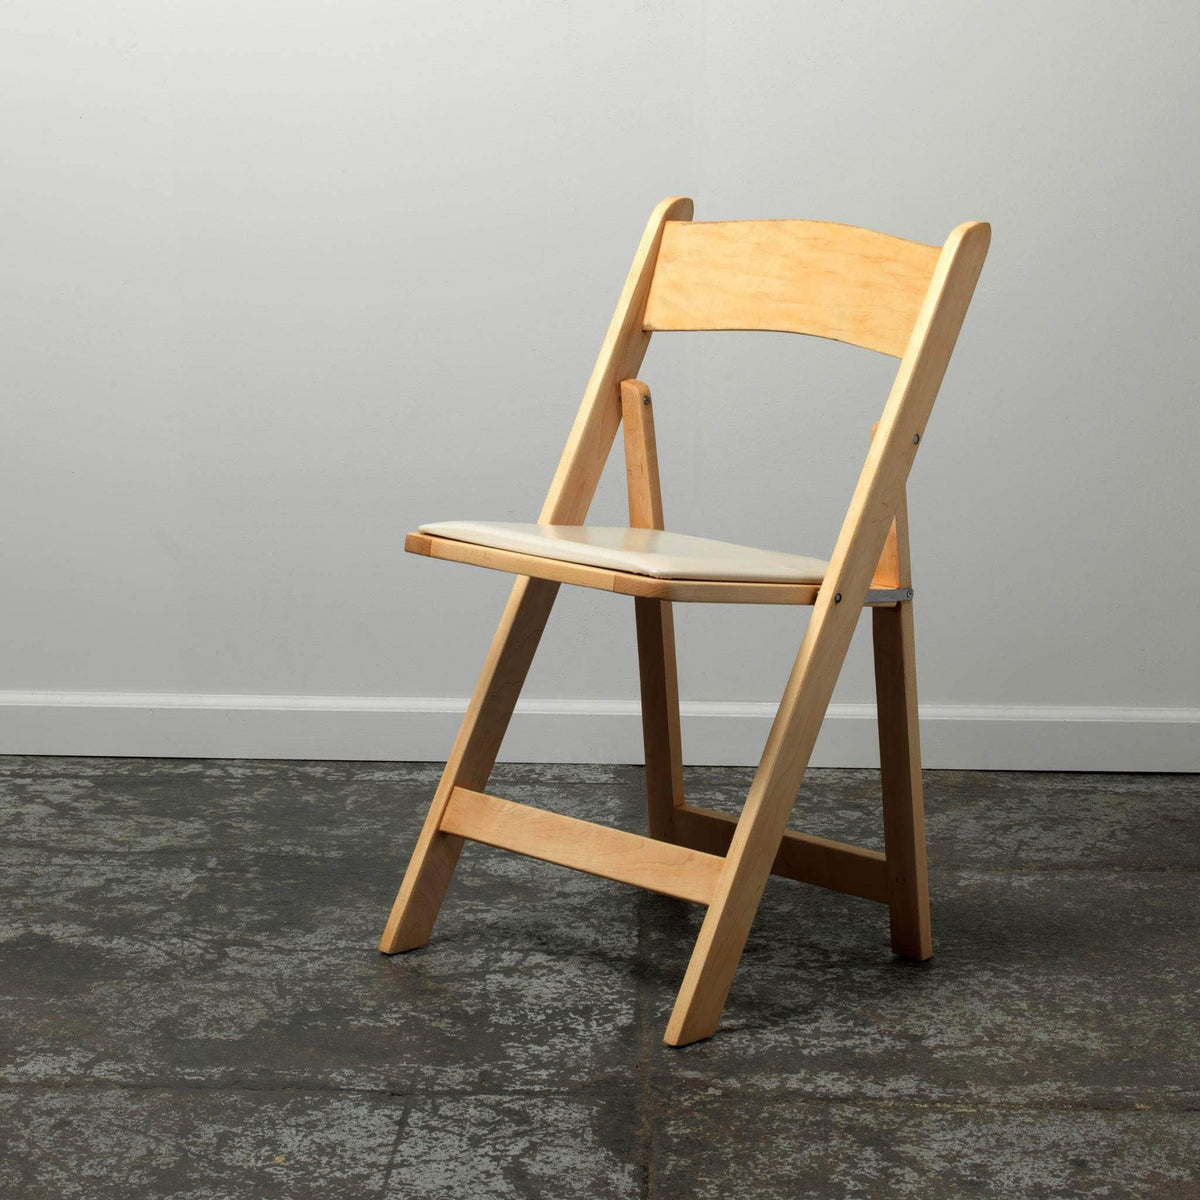 Natural Wooden Folding Chairs with Padded Seat